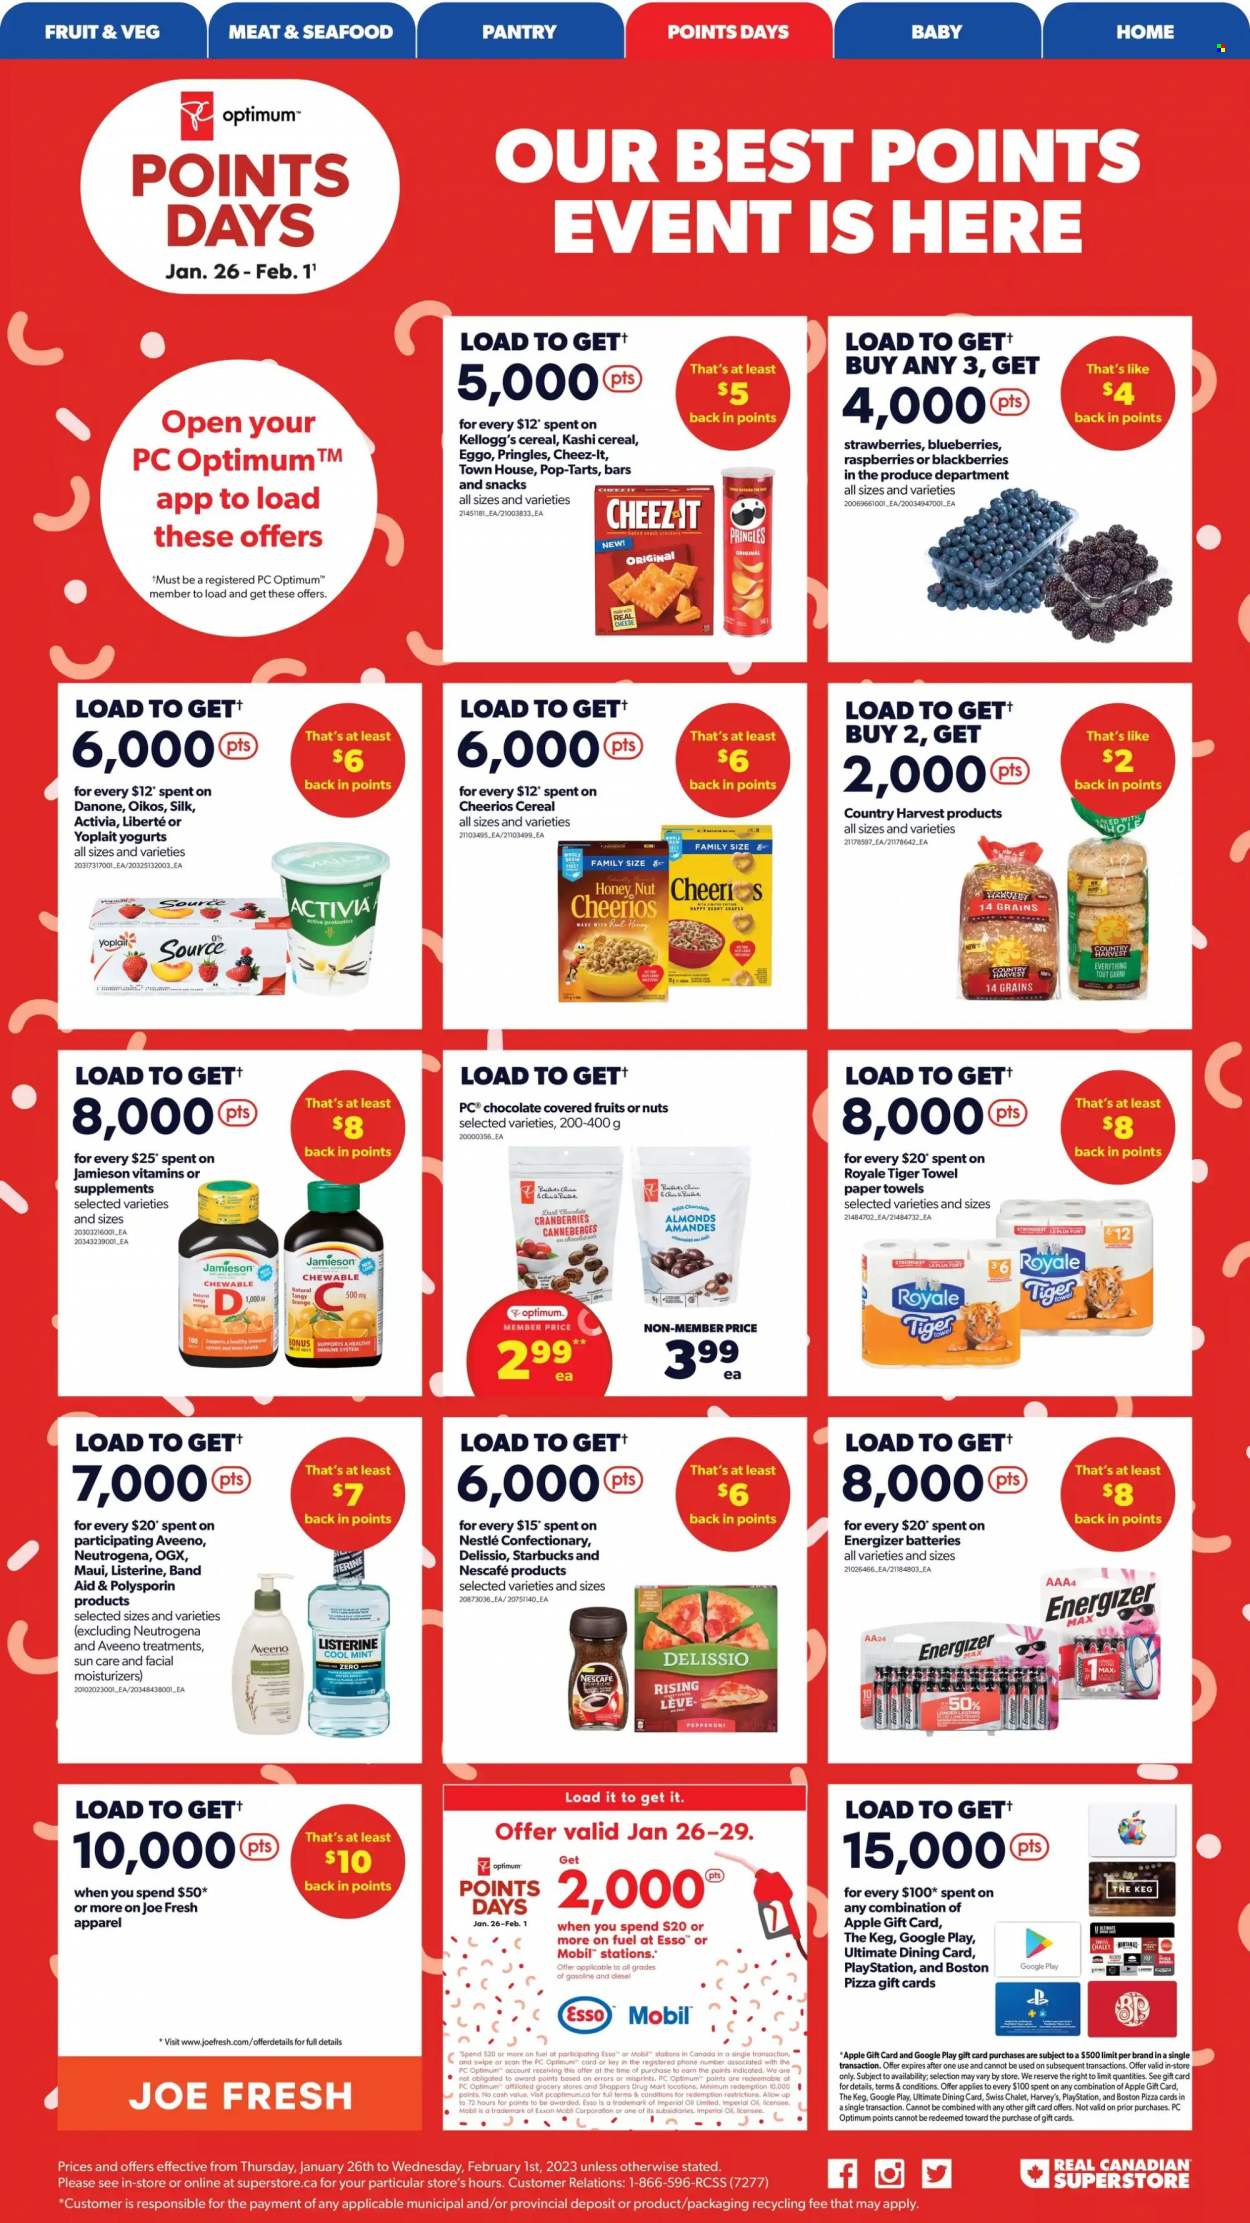 thumbnail - Real Canadian Superstore Flyer - January 26, 2023 - January 31, 2023 - Sales products - chair, blackberries, blueberries, oranges, seafood, pepperoni, Activia, Oikos, Yoplait, Silk, Country Harvest, crackers, Kellogg's, dark chocolate, Pop-Tarts, Pringles, Cheez-It, cranberries, cereals, Cheerios, Starbucks, Aveeno, kitchen towels, paper towels, moisturizer, OGX, battery, Optimum, PlayStation, probiotics, Energizer, Listerine, Nestlé, Neutrogena, Danone, Nescafé. Page 2.